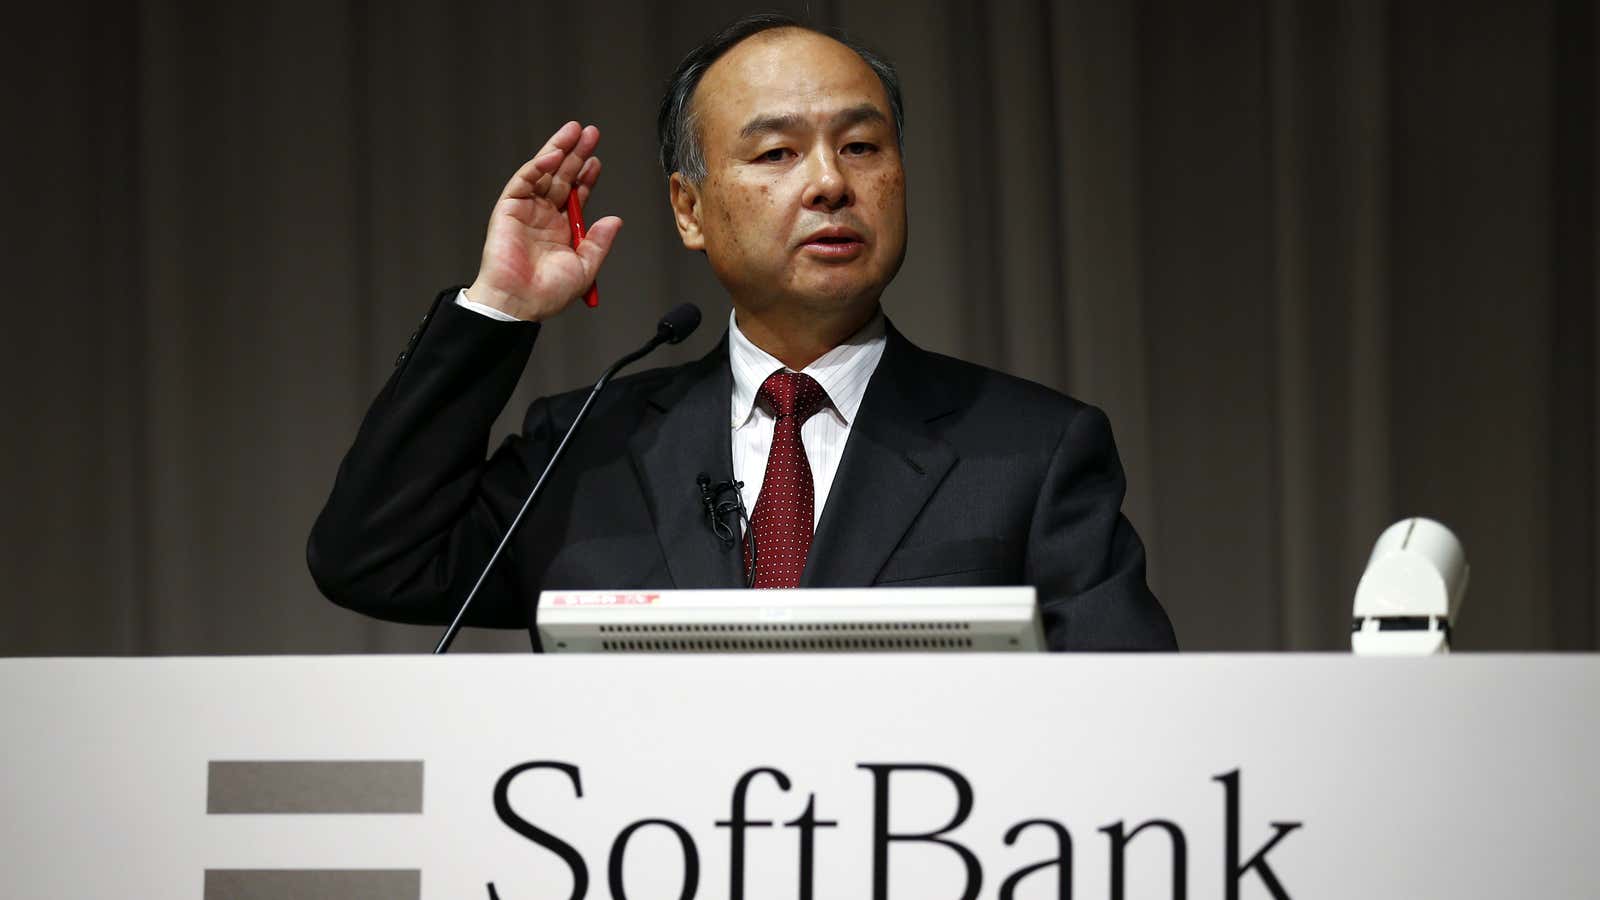 SoftBank, under the leadership of CEO Masayoshi Son, has become one of the largest startup funders in the world.